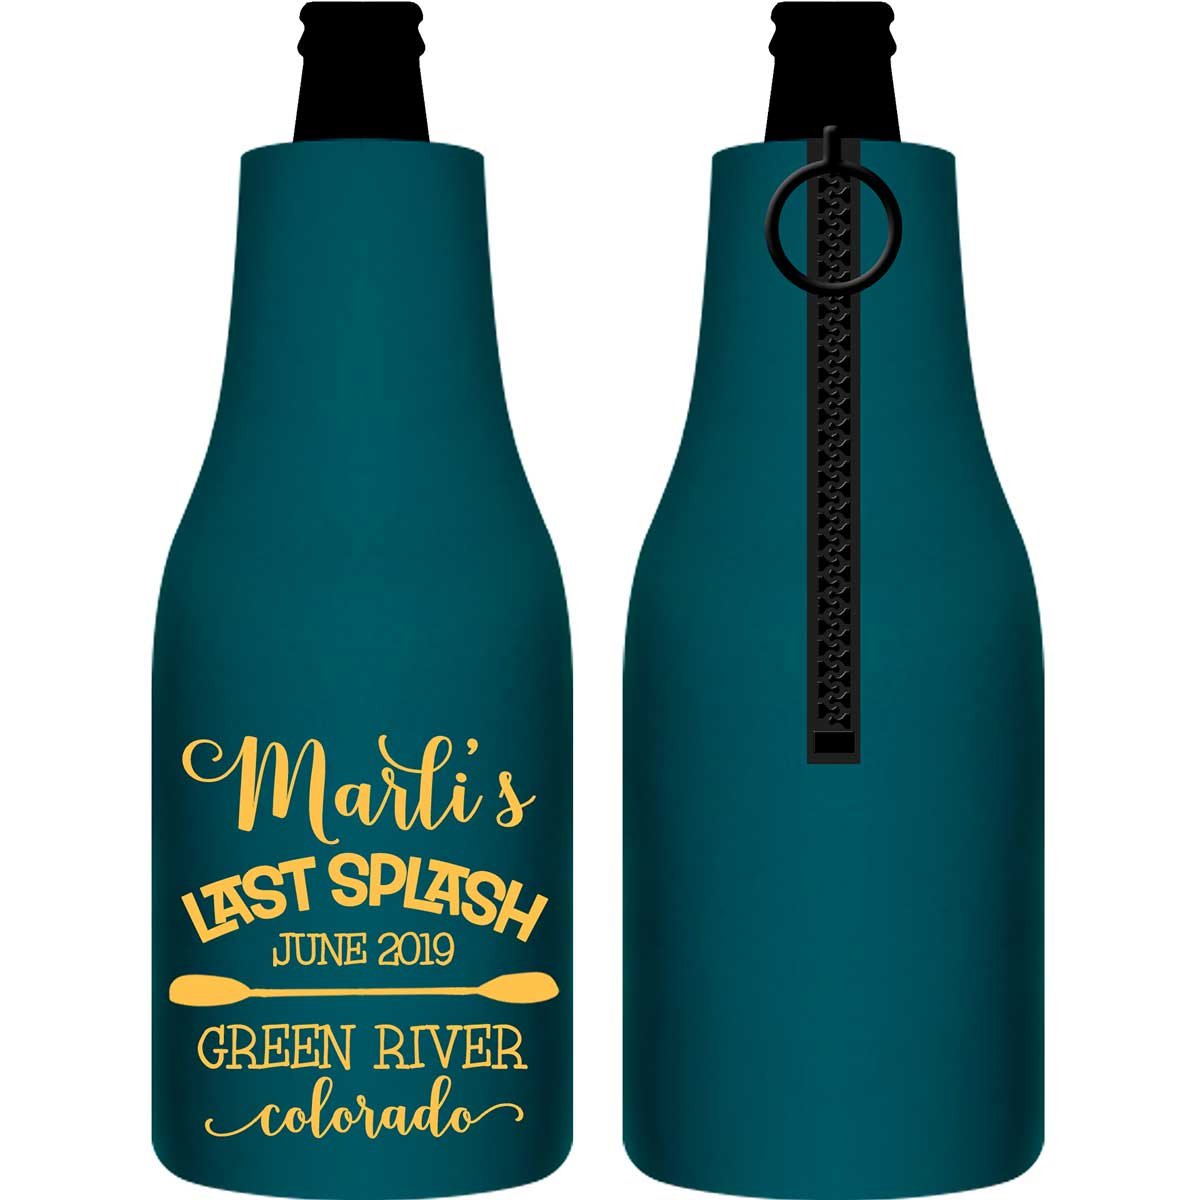 The Last Splash 2A Foldable Zippered Bottle Koozies Bachelorette Party Gifts for Guests